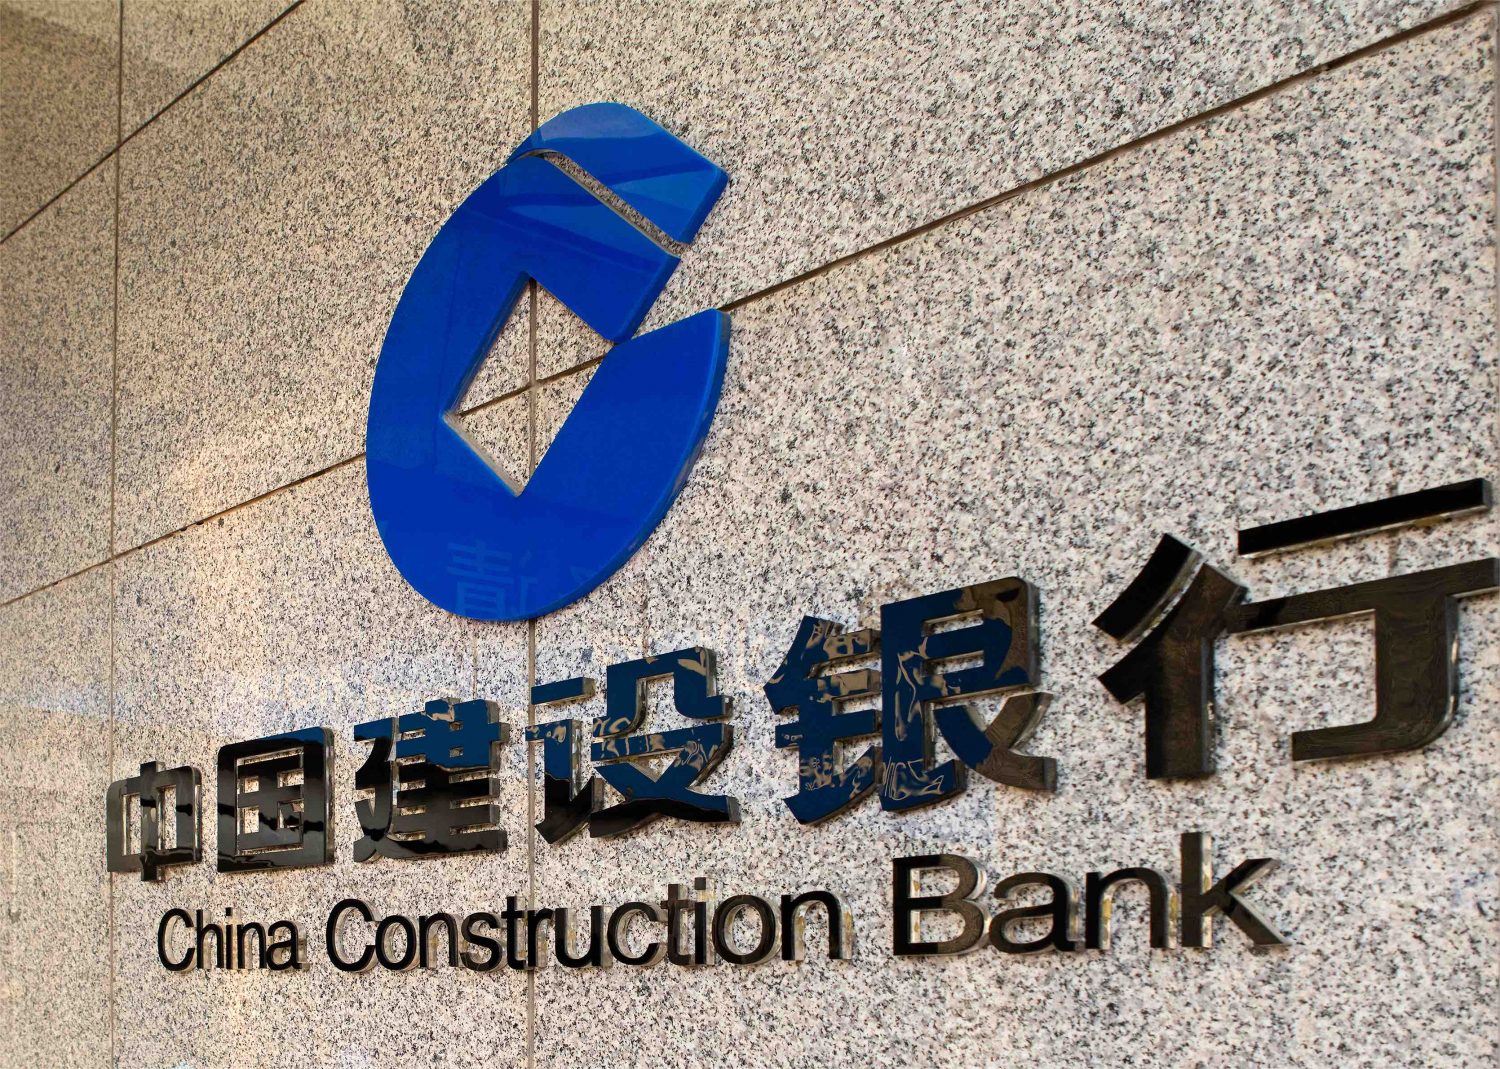 State-Owned Chinese Bank To Finance Small Businesses With Blockchain Tech